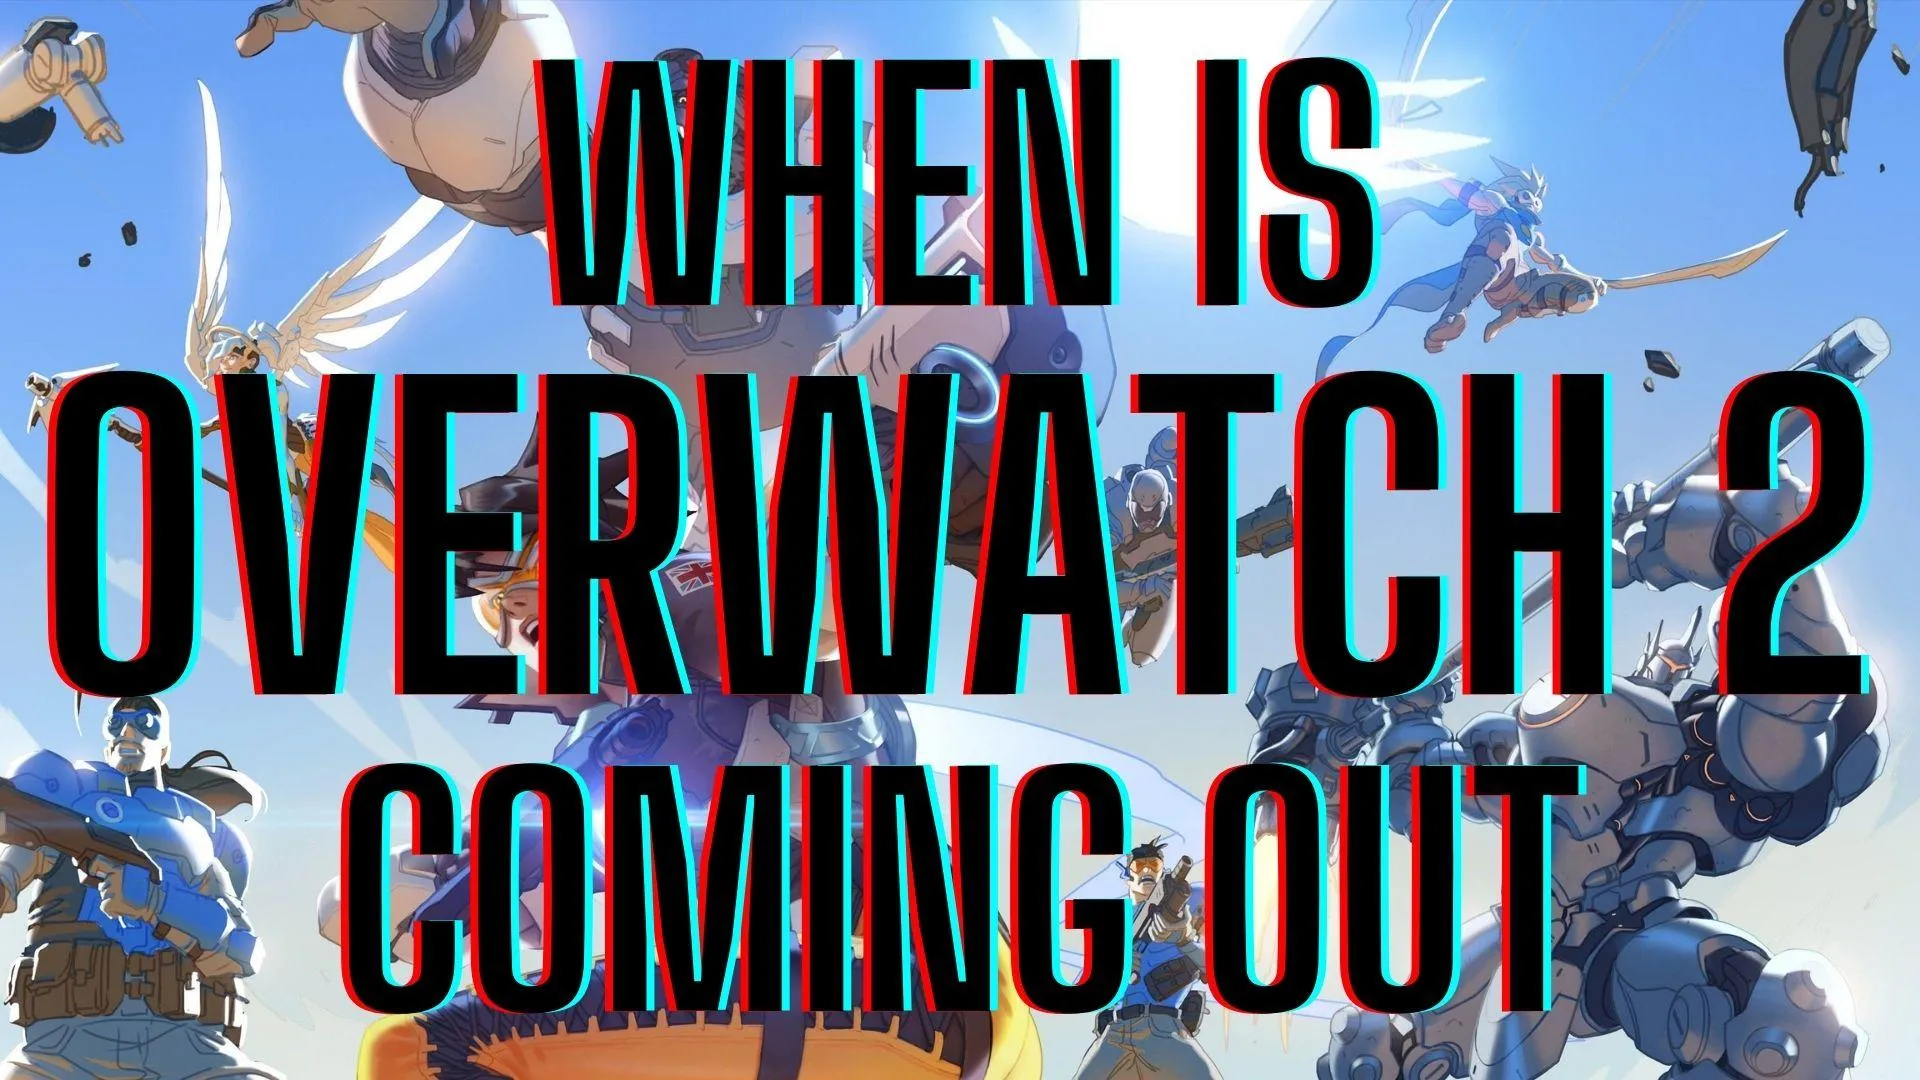 When is Overwatch 2 Coming Out? - Overwatch 2 Release Date